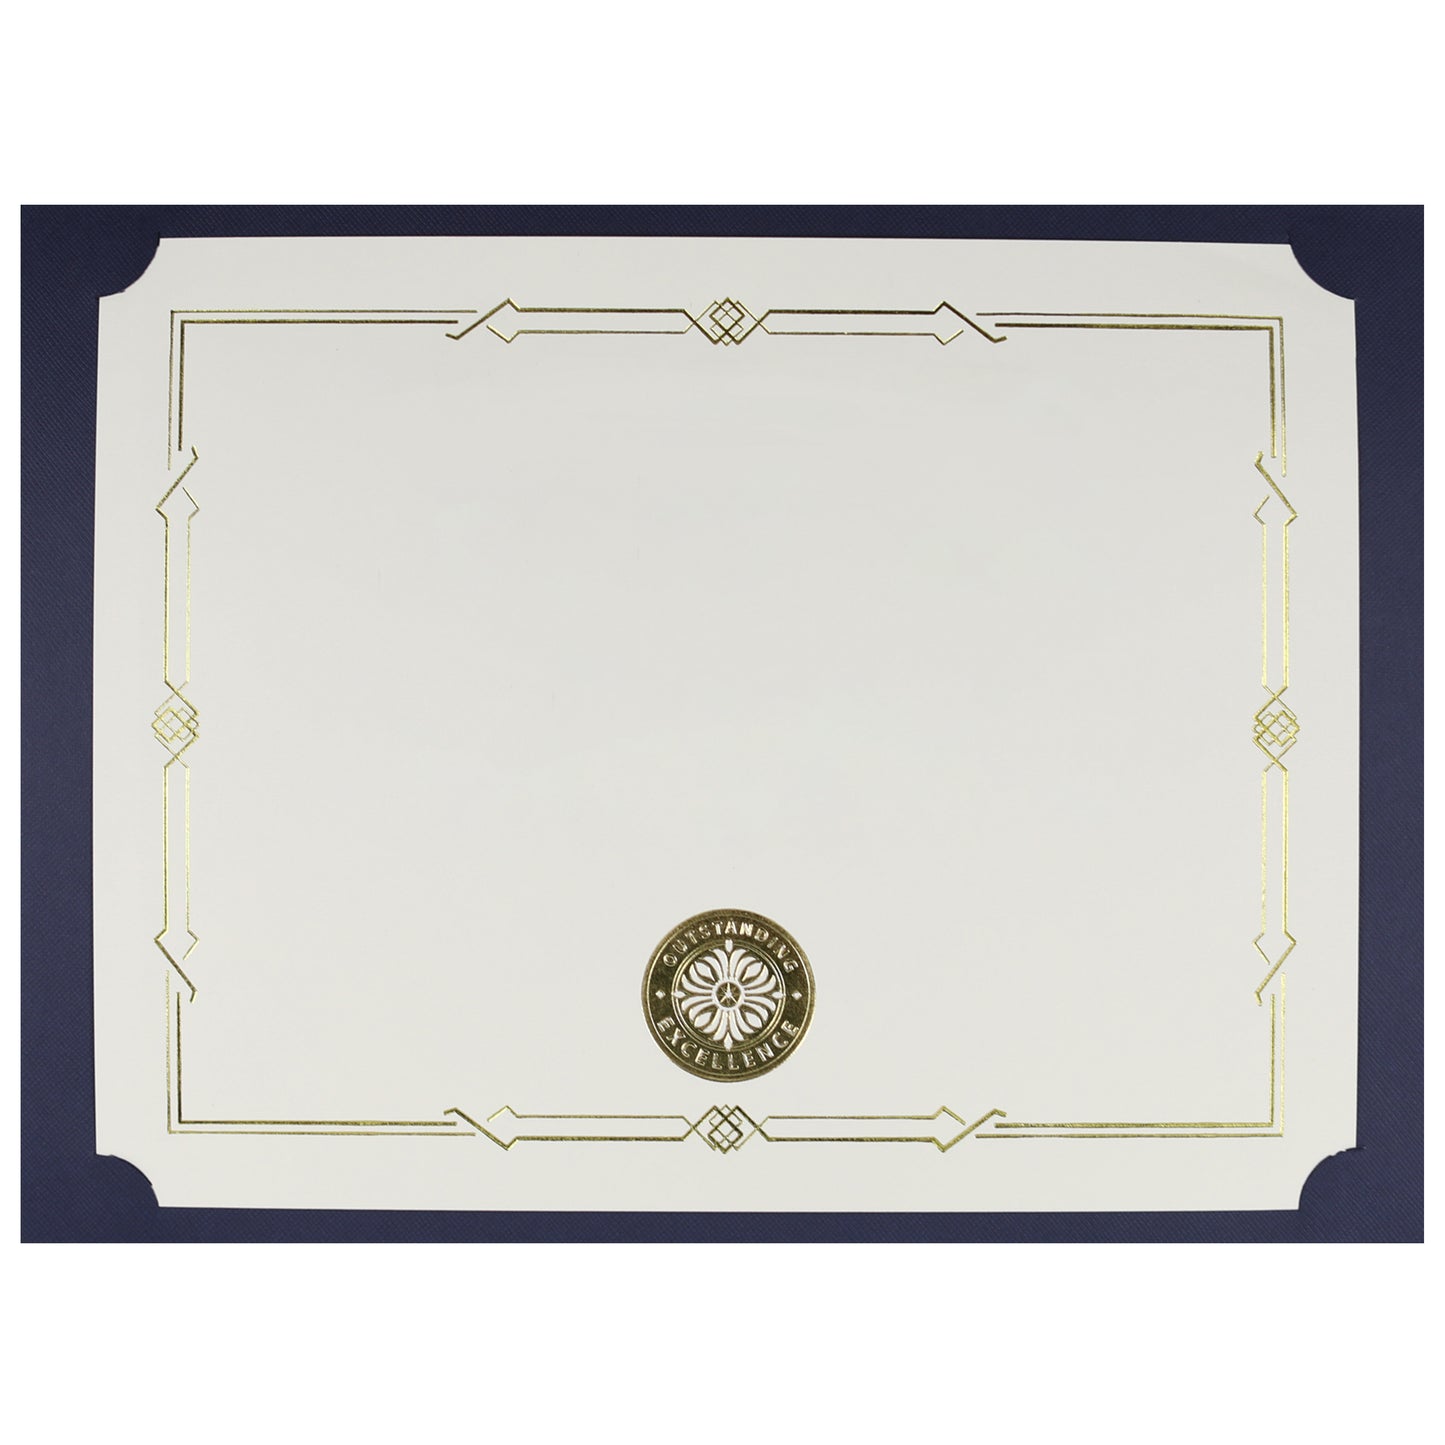 St. James® Certificate Holders/Document Covers/Diploma Holders, Navy Blue, Gold Award Seal with Gold Ribbon, Pack of 5, 83816